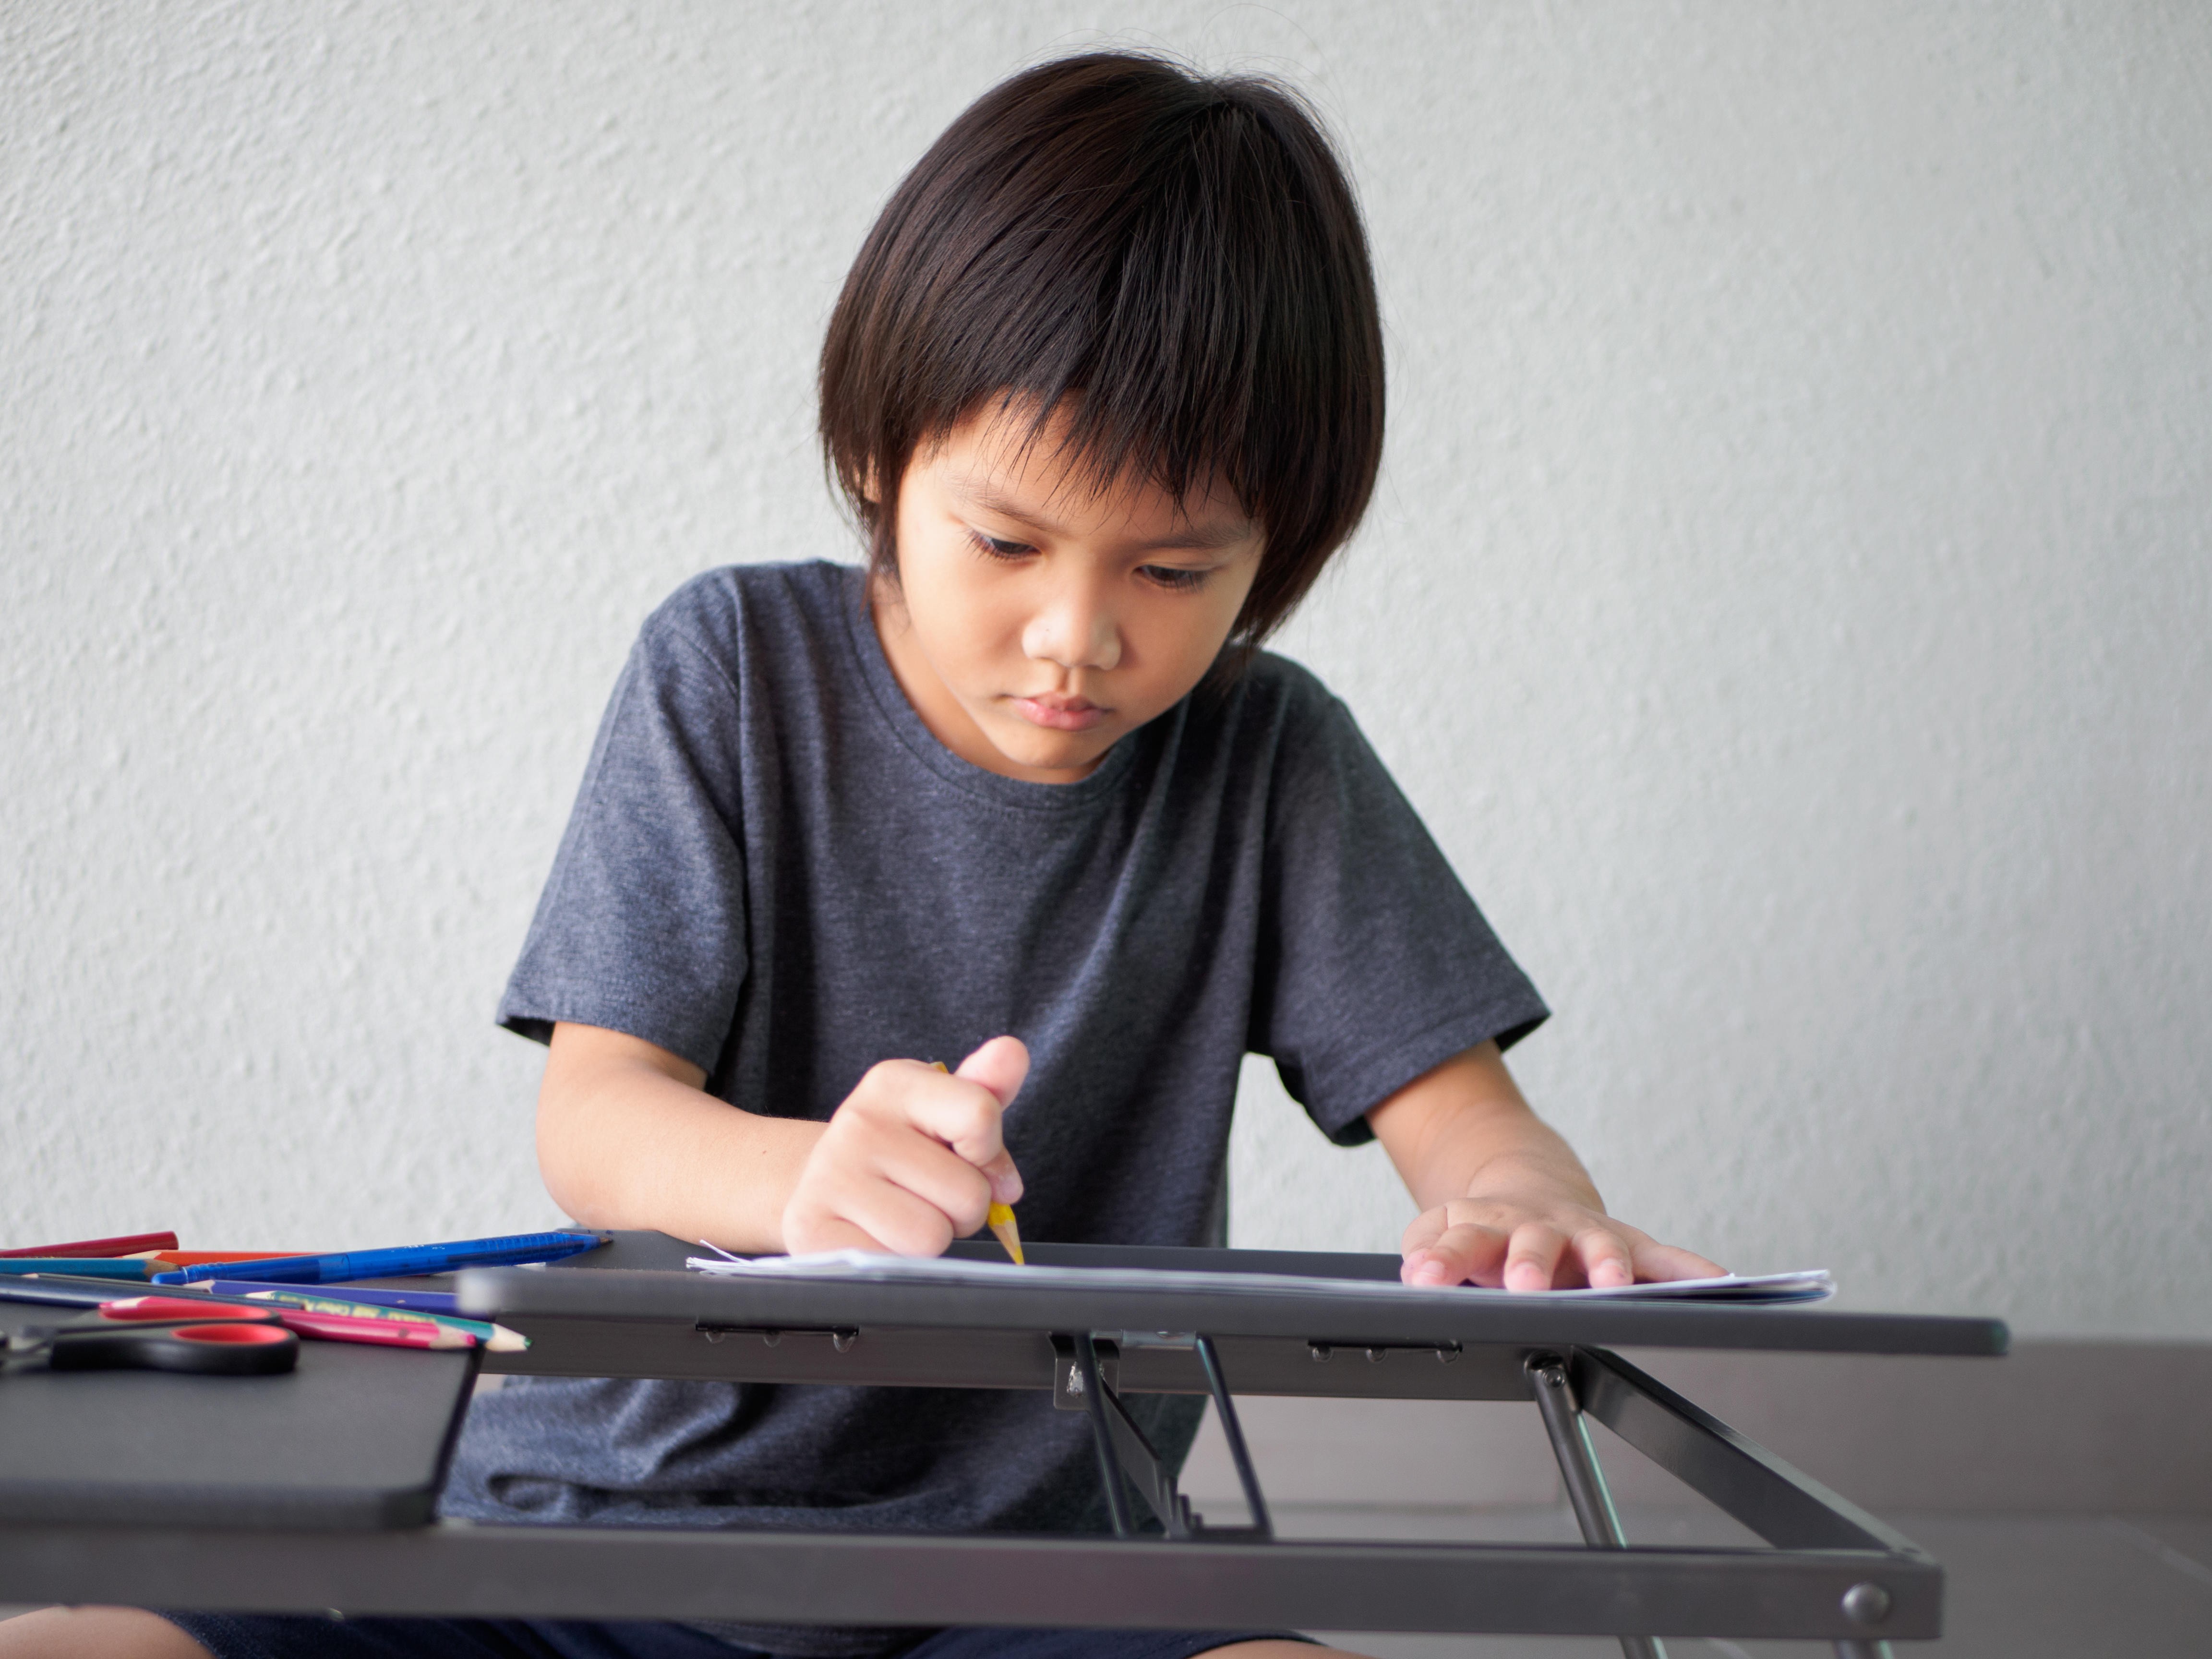 When a child wants to do their homework by themselves they are showing independence and developing their self-organisation skills. Photo: Alamy